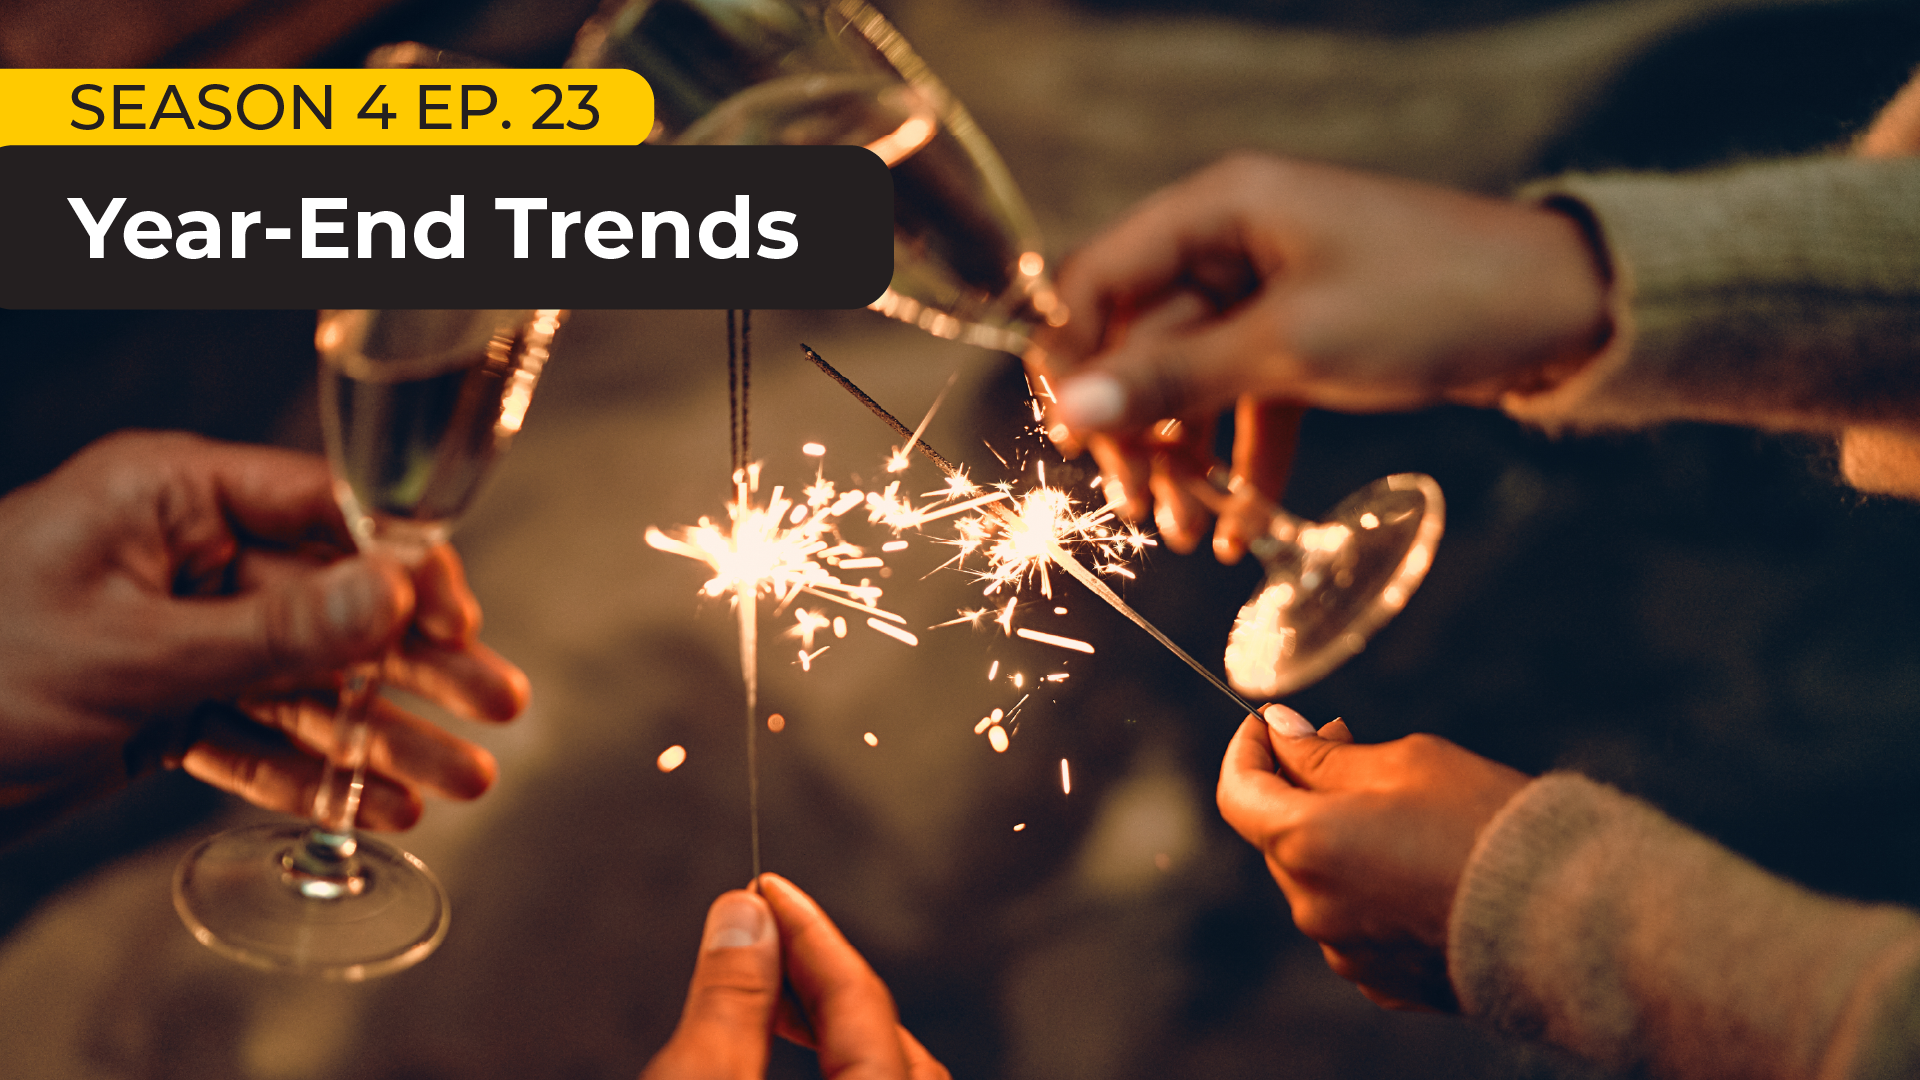 For our last webinar of 2022, Datassential team Jack Li, Mike Kostyo, and Renee Lee Wege take a look back at all of the coolest industry happenings from the past year and share a sneak peek of our highly anticipated 2023 Food Trends report.